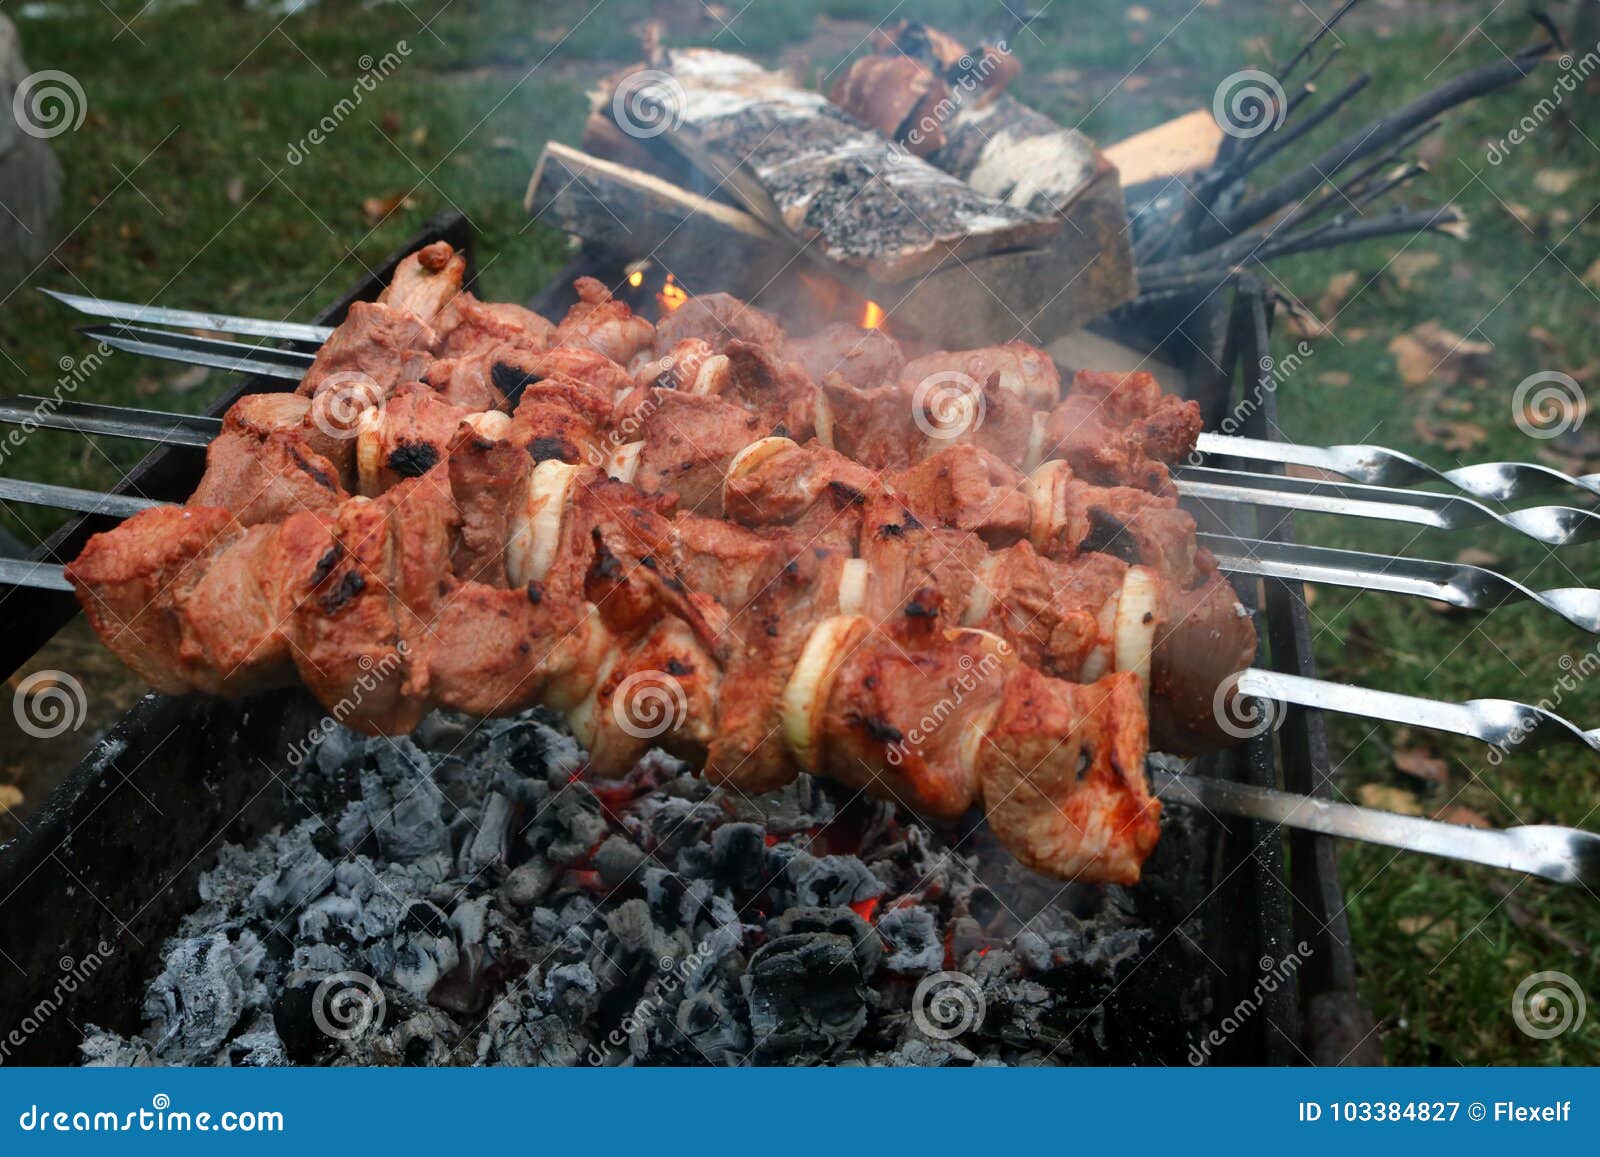 Grill Meat Barbeque on Fire. Stock Image - Image of kebab, tasty: 103384827